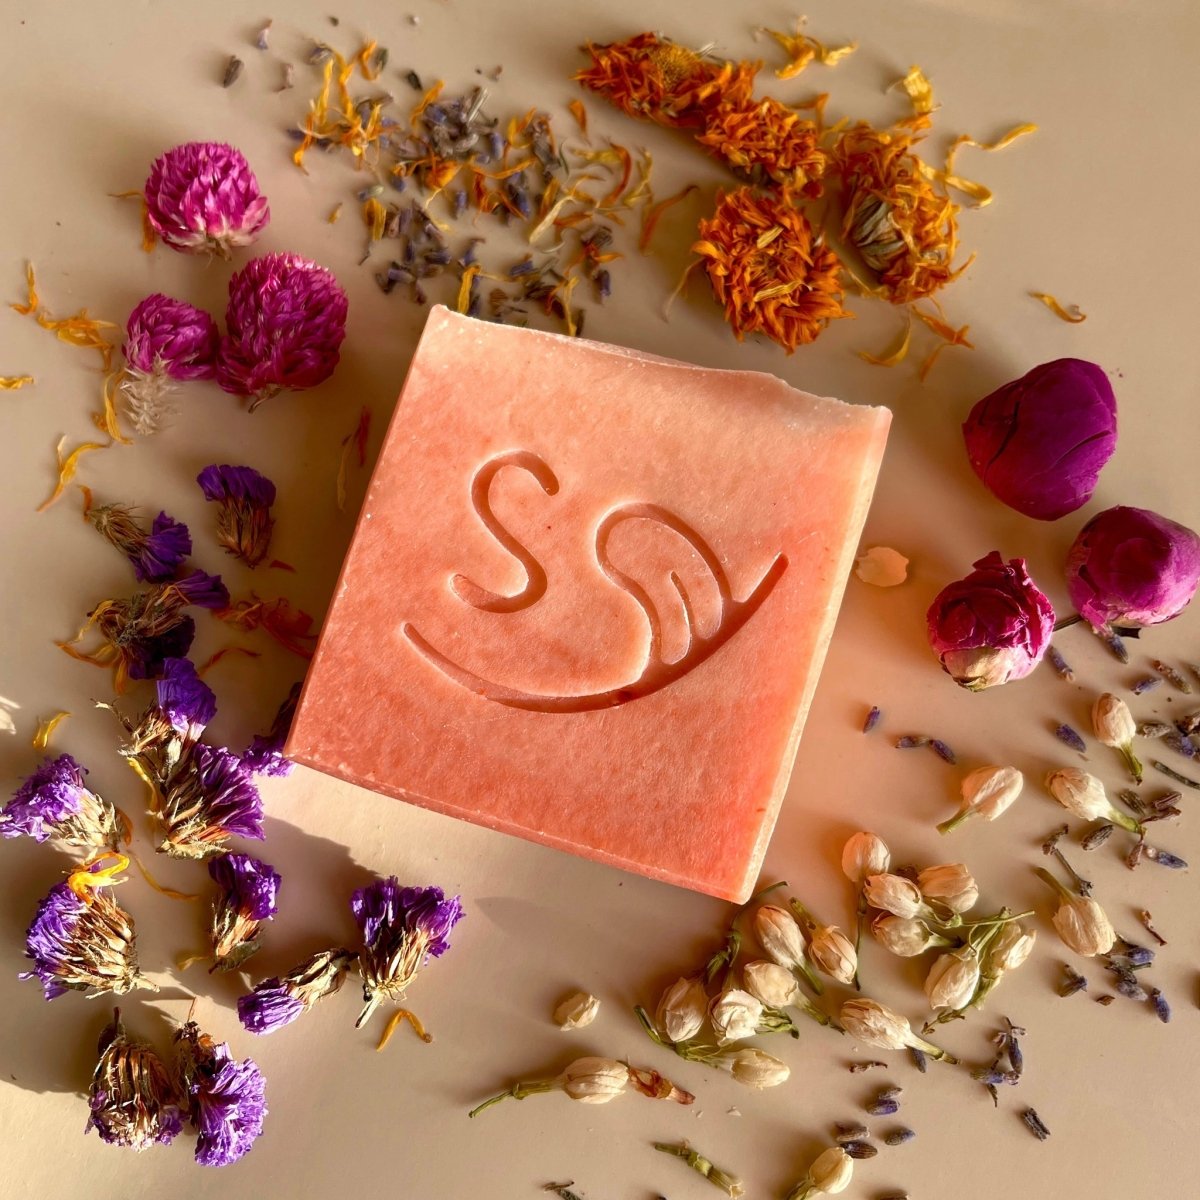 Seven Flowers Harmony Soap by Soap Yummy - BetterThanFlowers